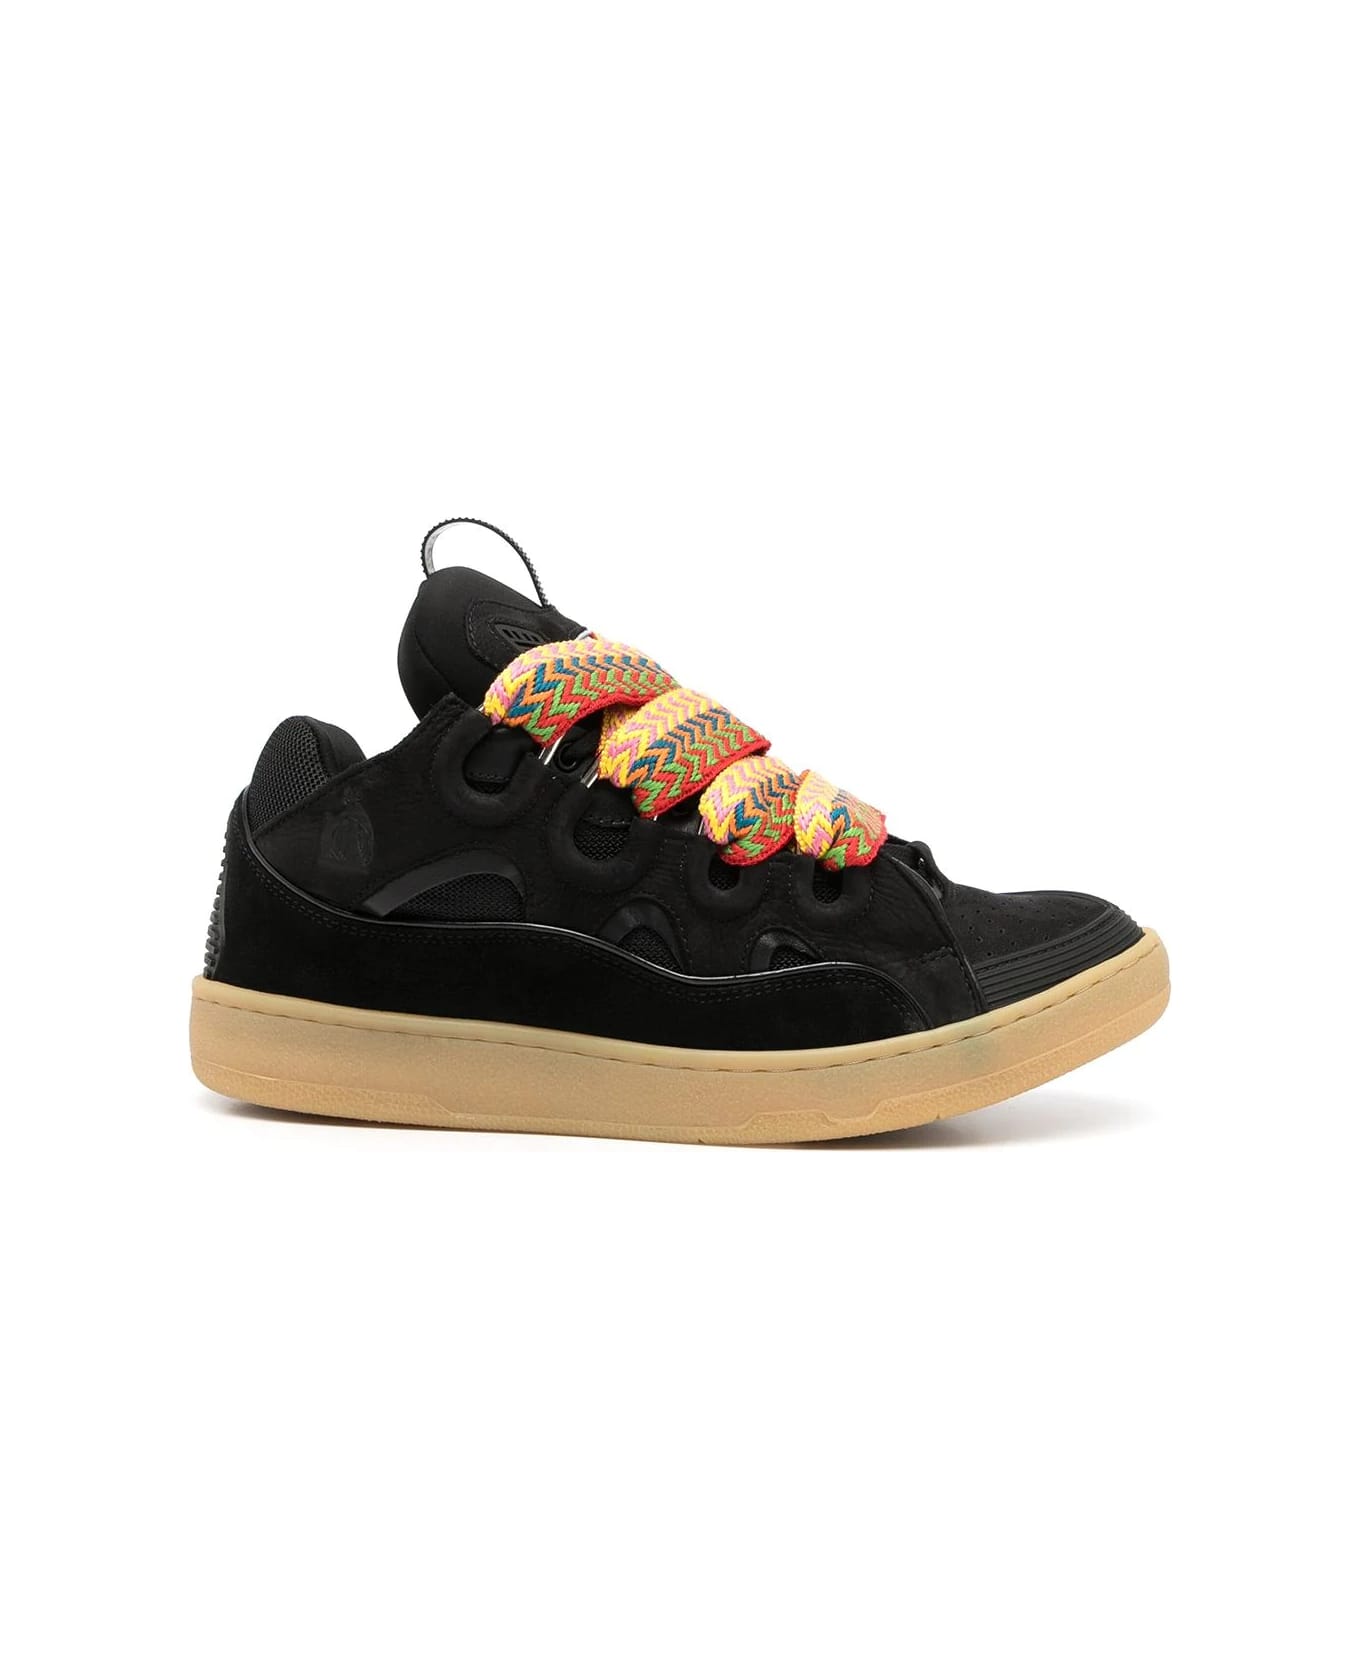 Lanvin "curb" Sneakers In Black Leather - Black